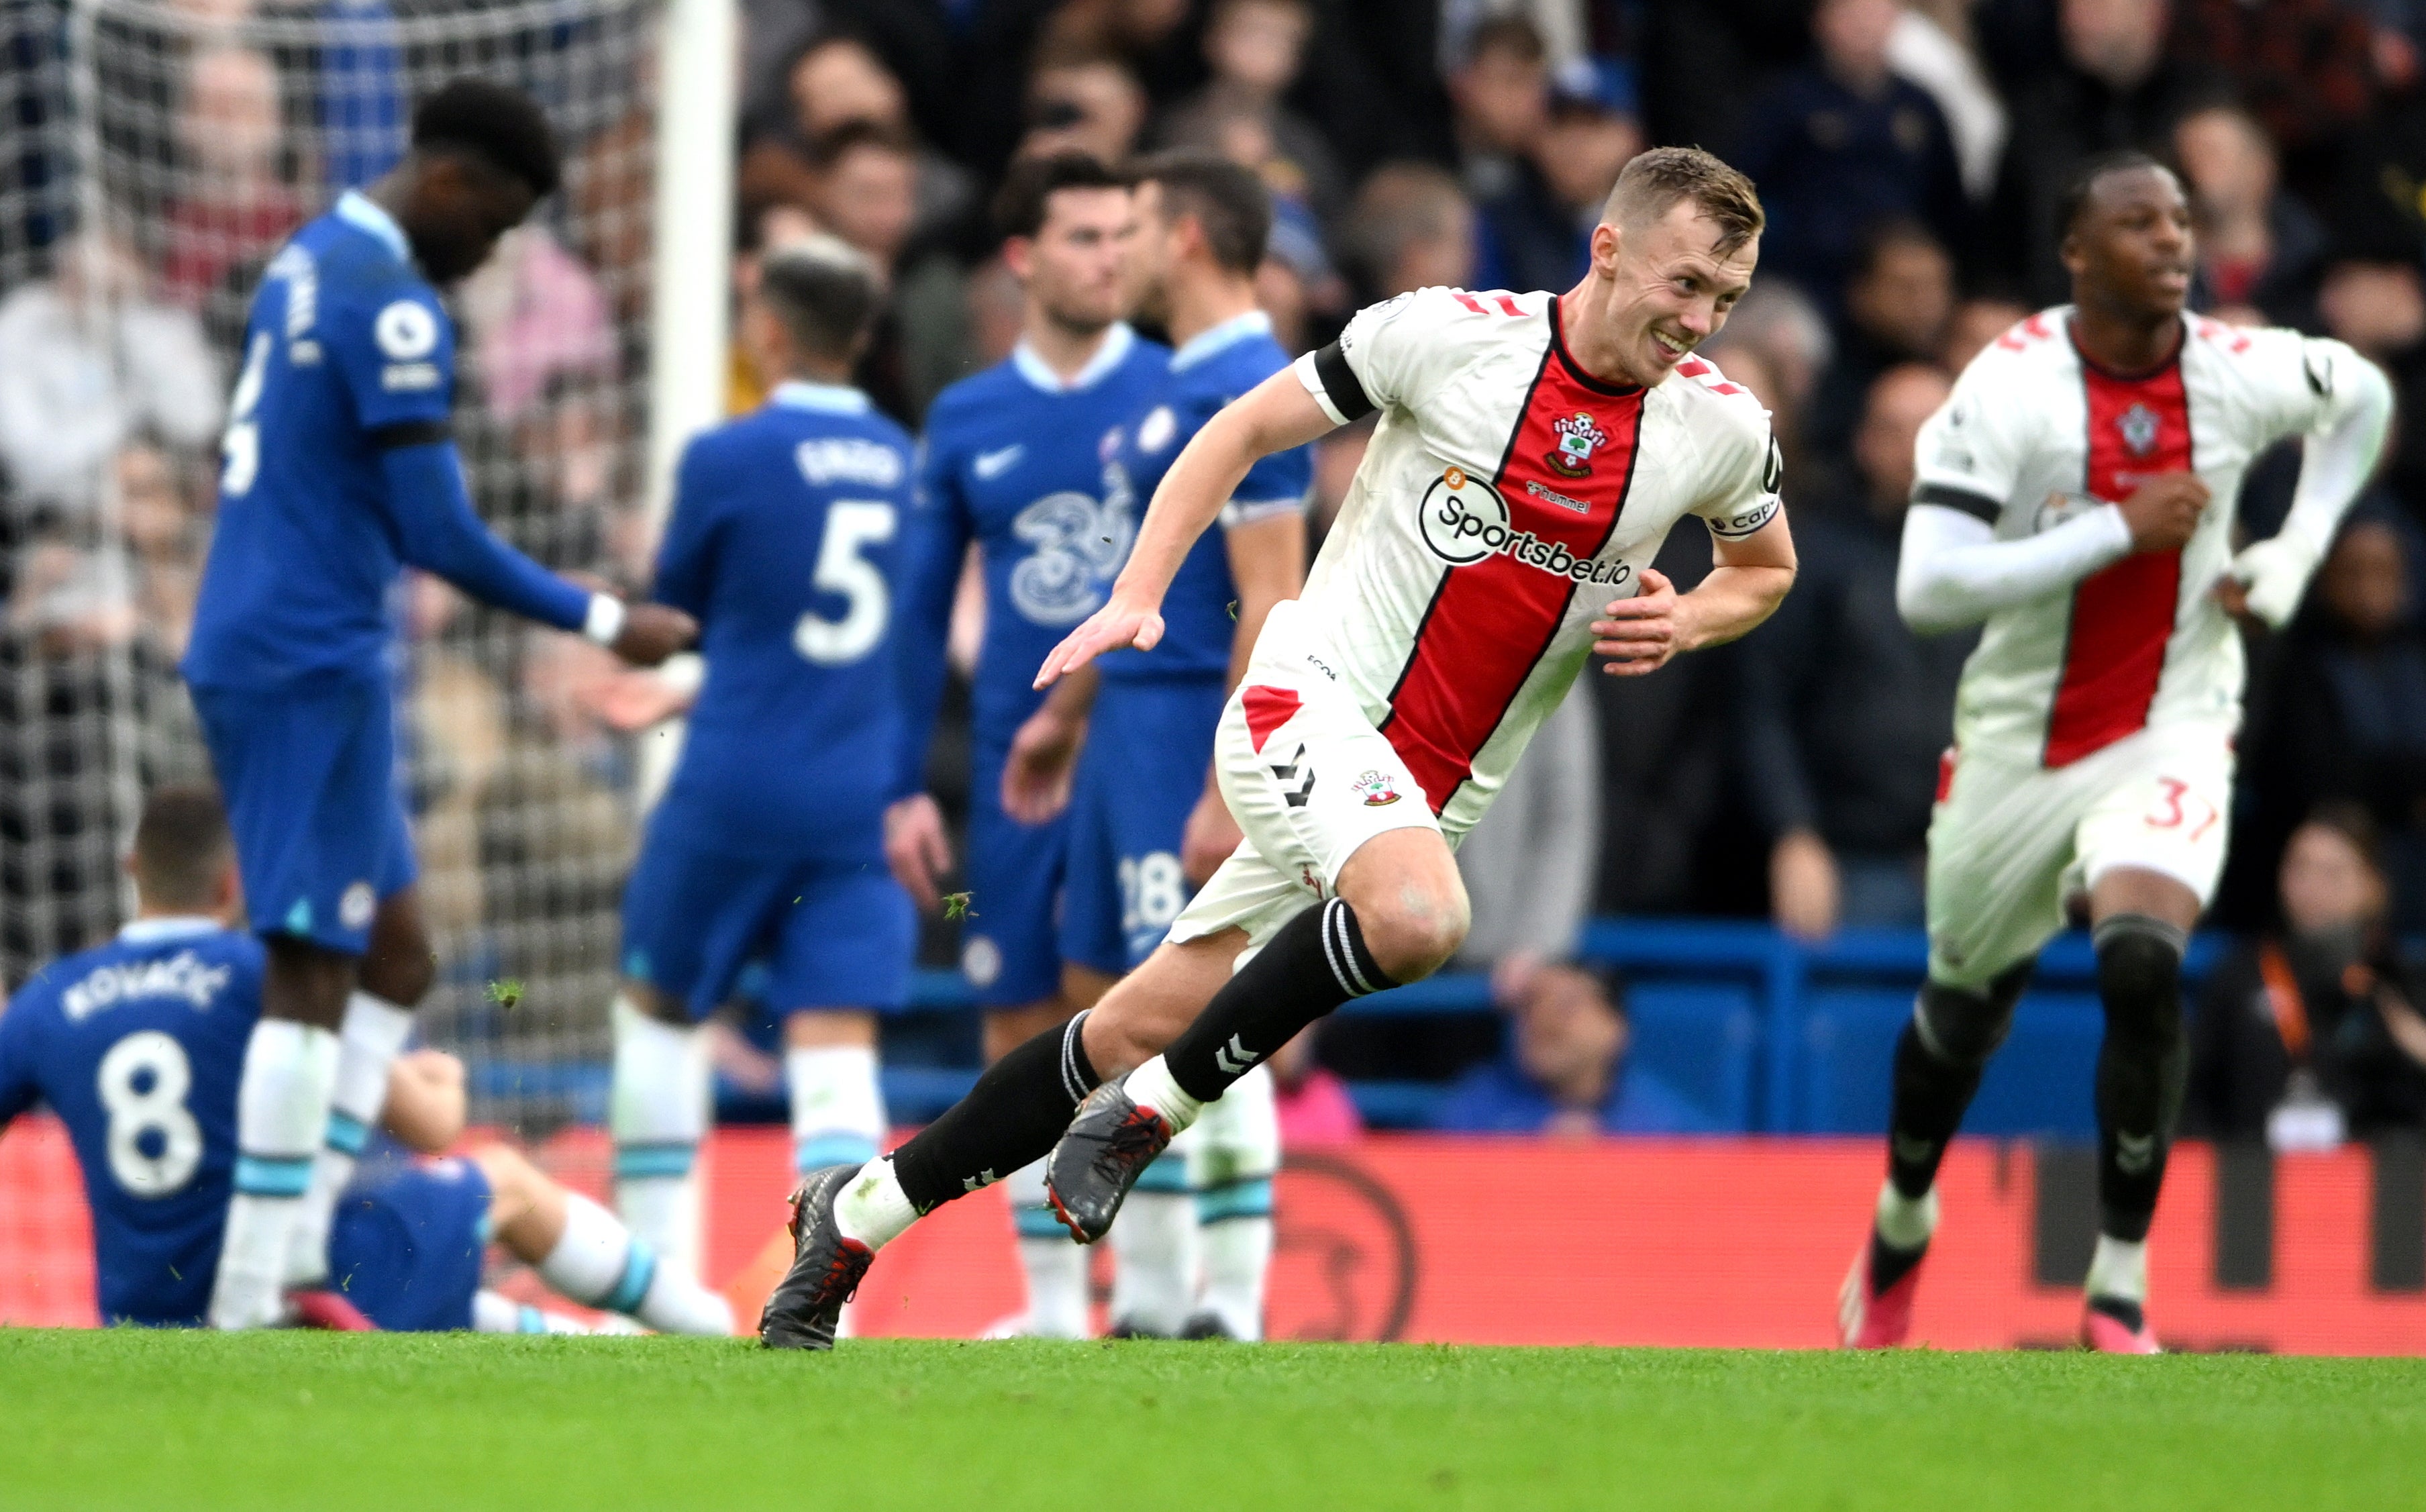 Chelsea Southampton result: Final score, goals, highlights and Premier League match report The